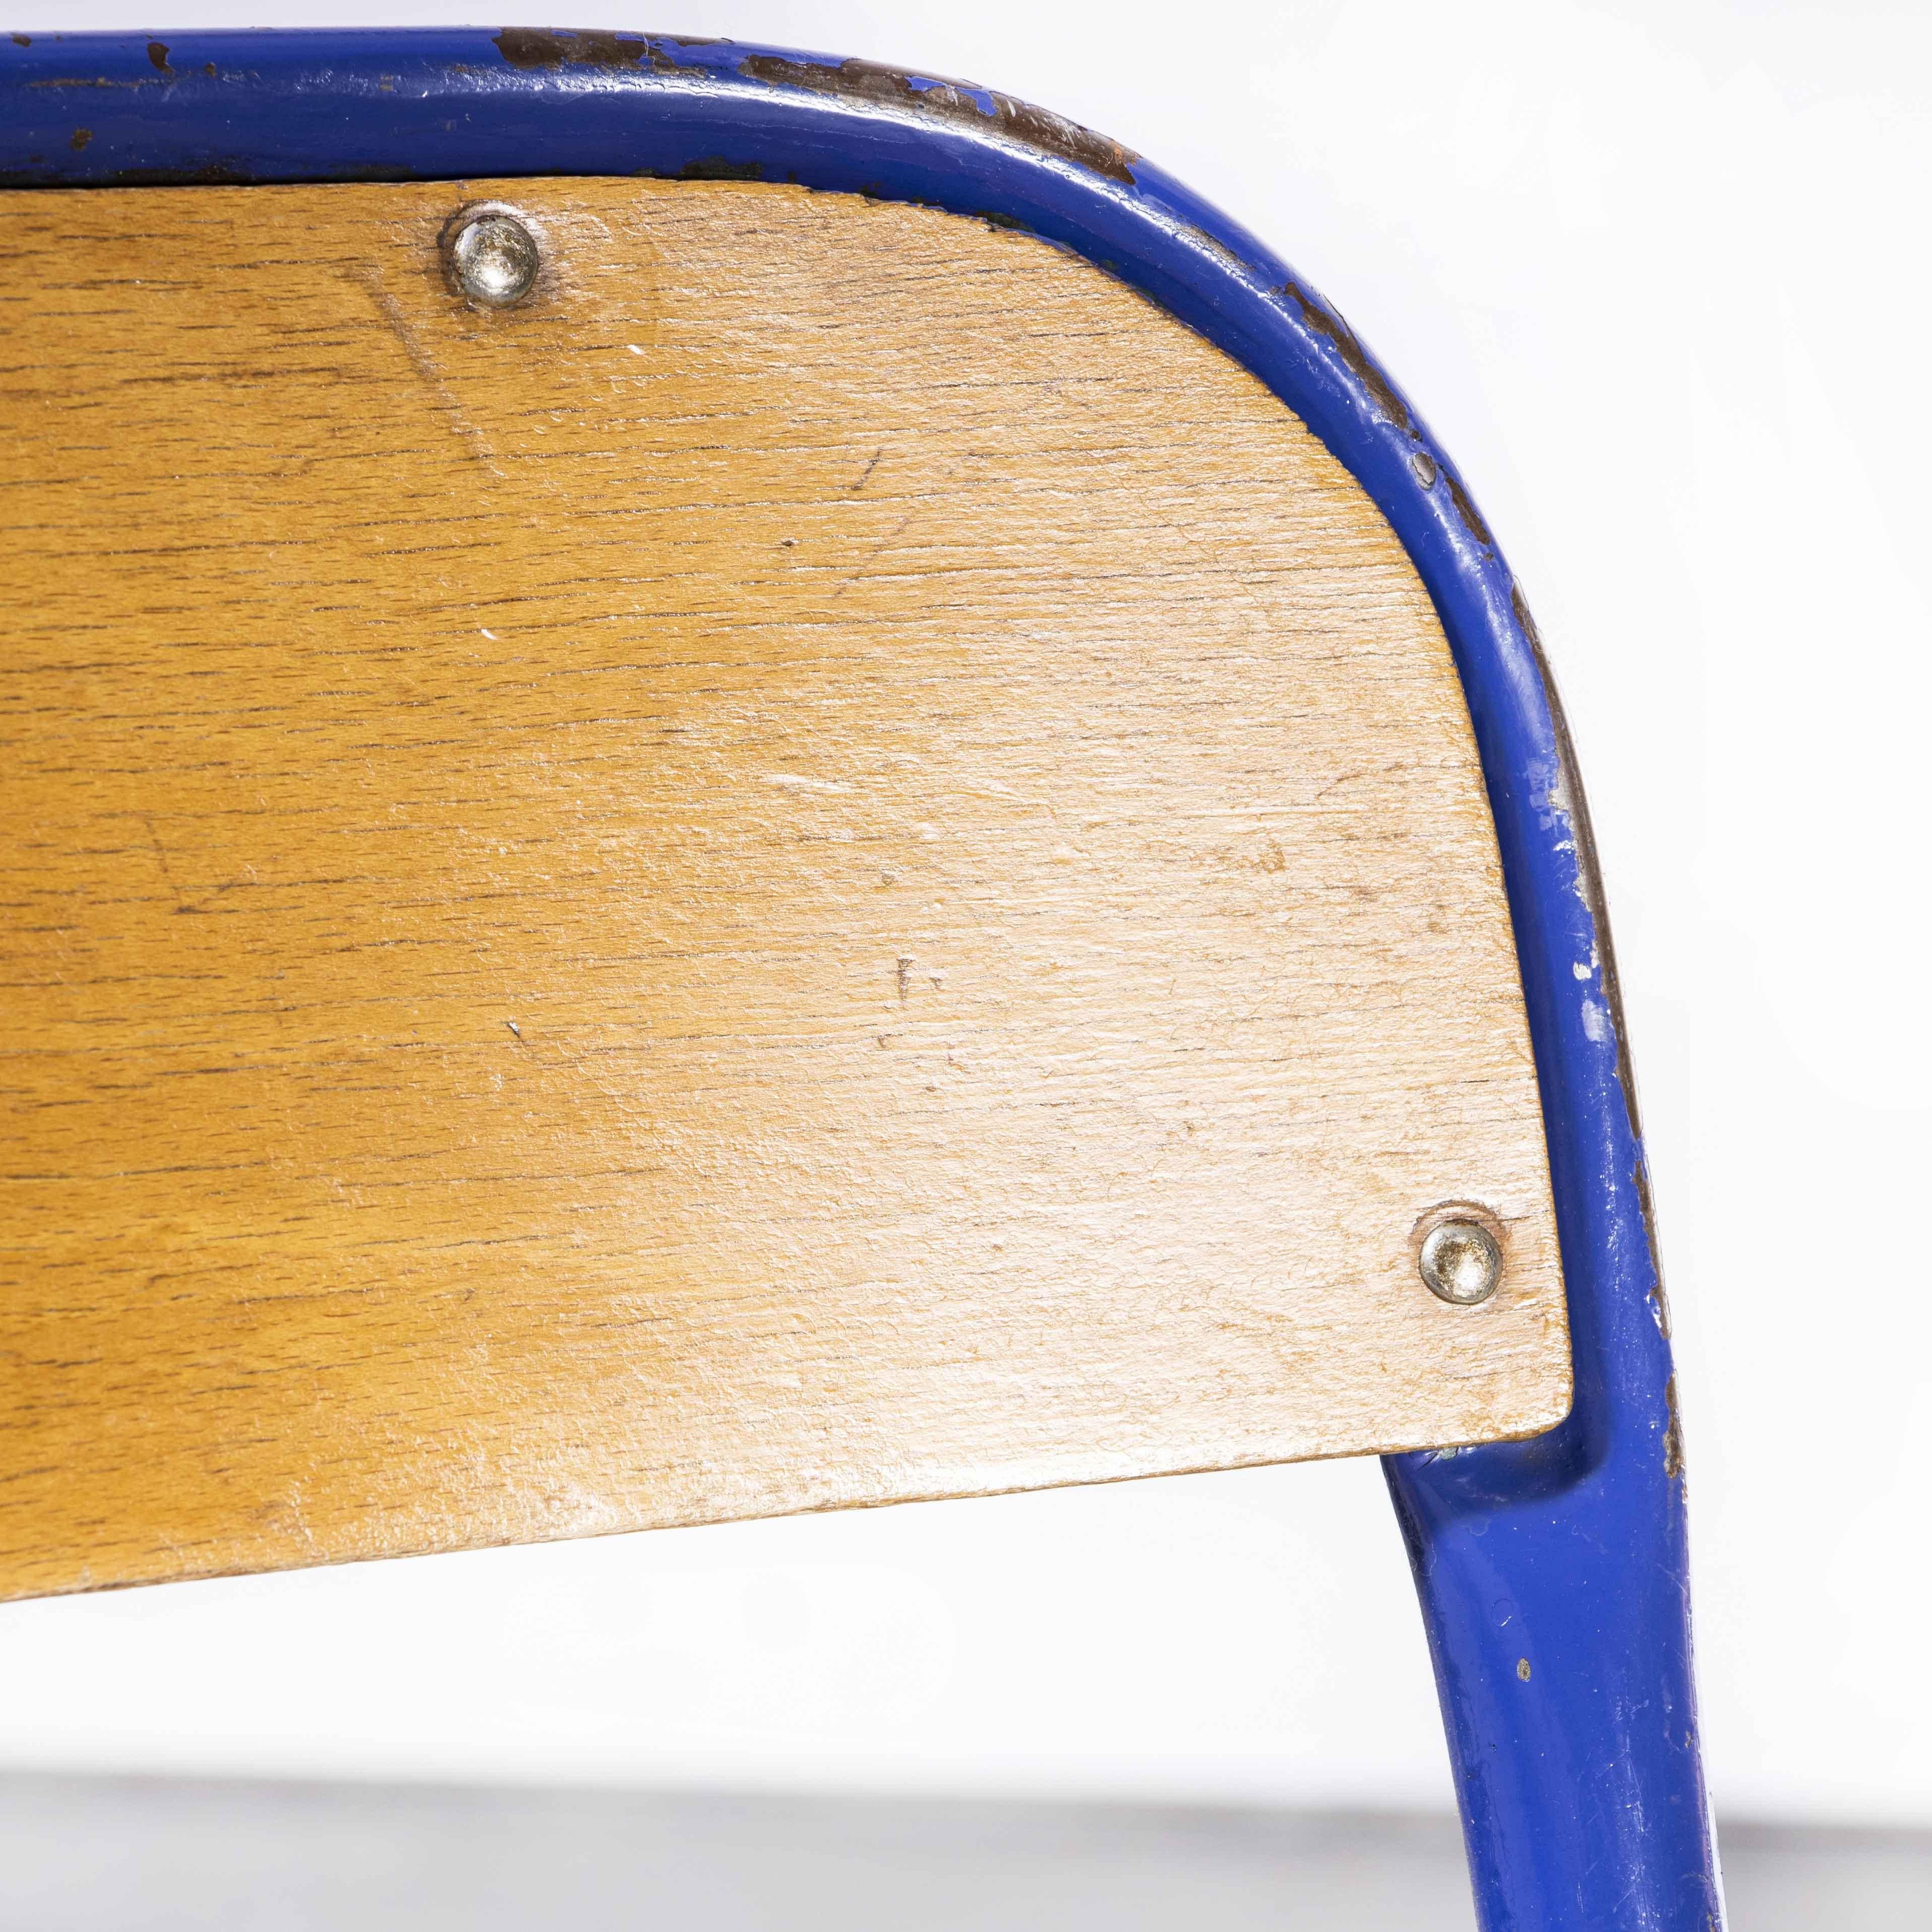 1970’s French Mullca Stacking Chair – Deep Blue – Set of six
1970’s French Mullca Stacking Chair – Deep Blue – Set of six. One of our most favourite chairs, in 1947 Robert Muller and Gaston Cavaillon created the company that went on to develop